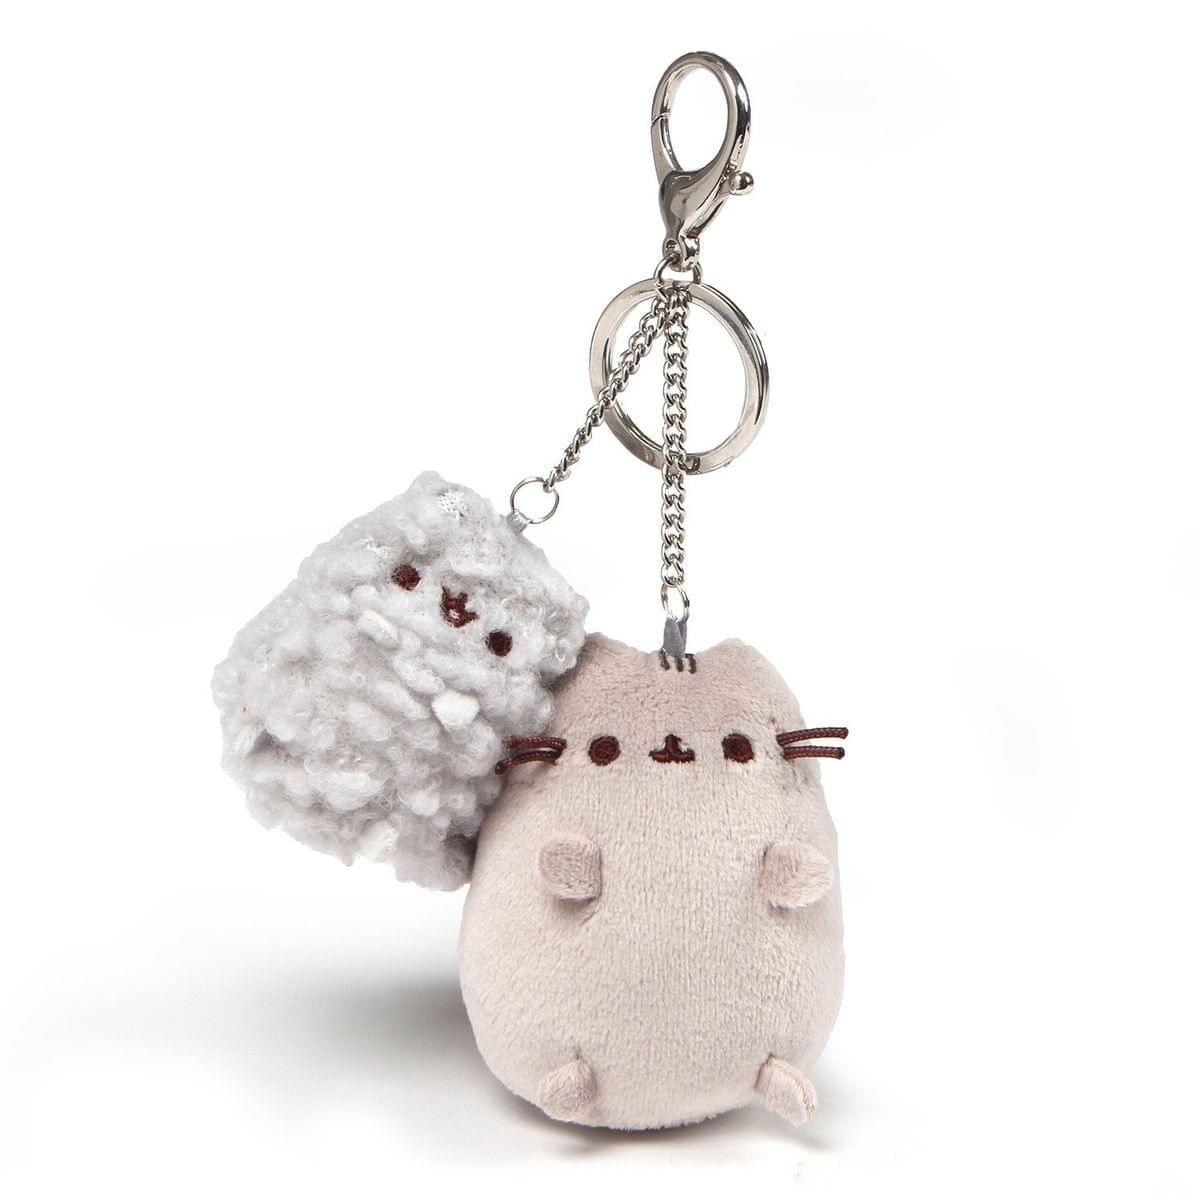 Pusheen and Stormy 4.5" Deluxe Plush Keychain